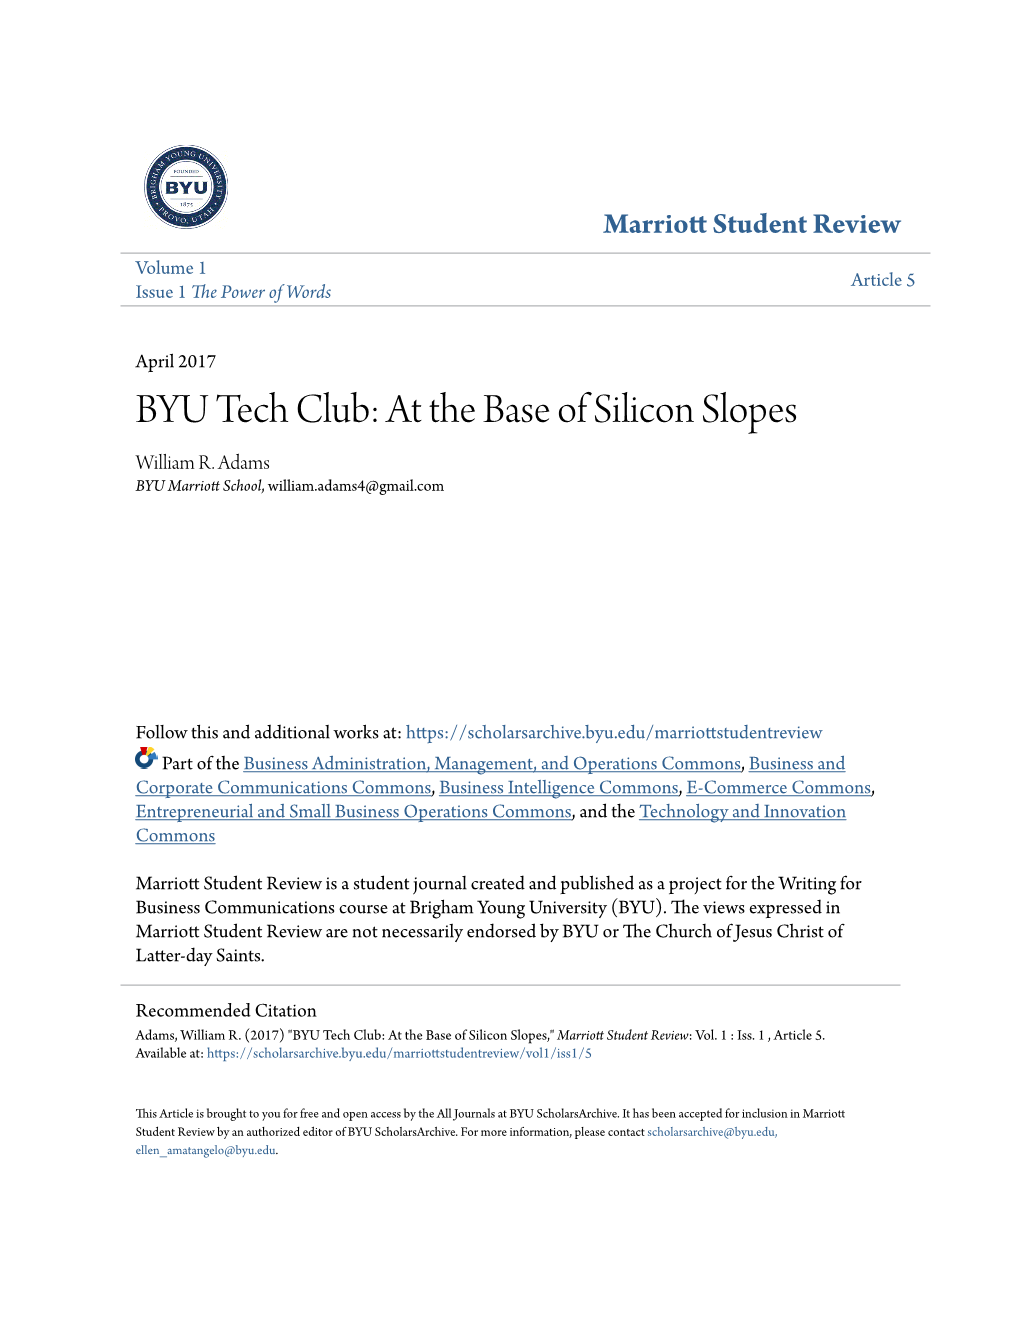 BYU Tech Club: at the Base of Silicon Slopes William R